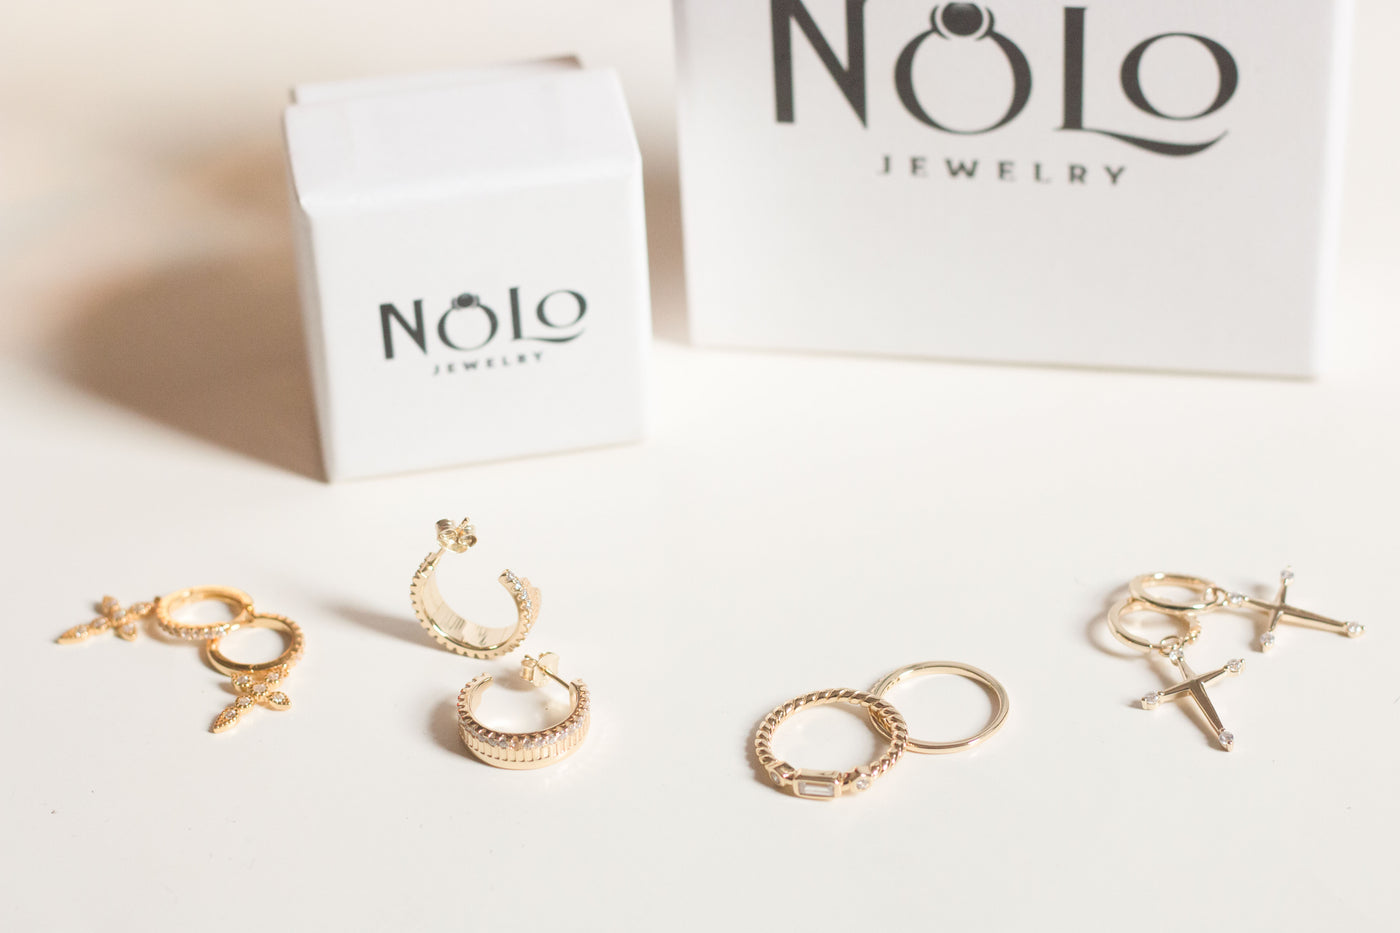 nolo jewelry signature gold cross earrings rings hoop earrings and jewelry box on white background